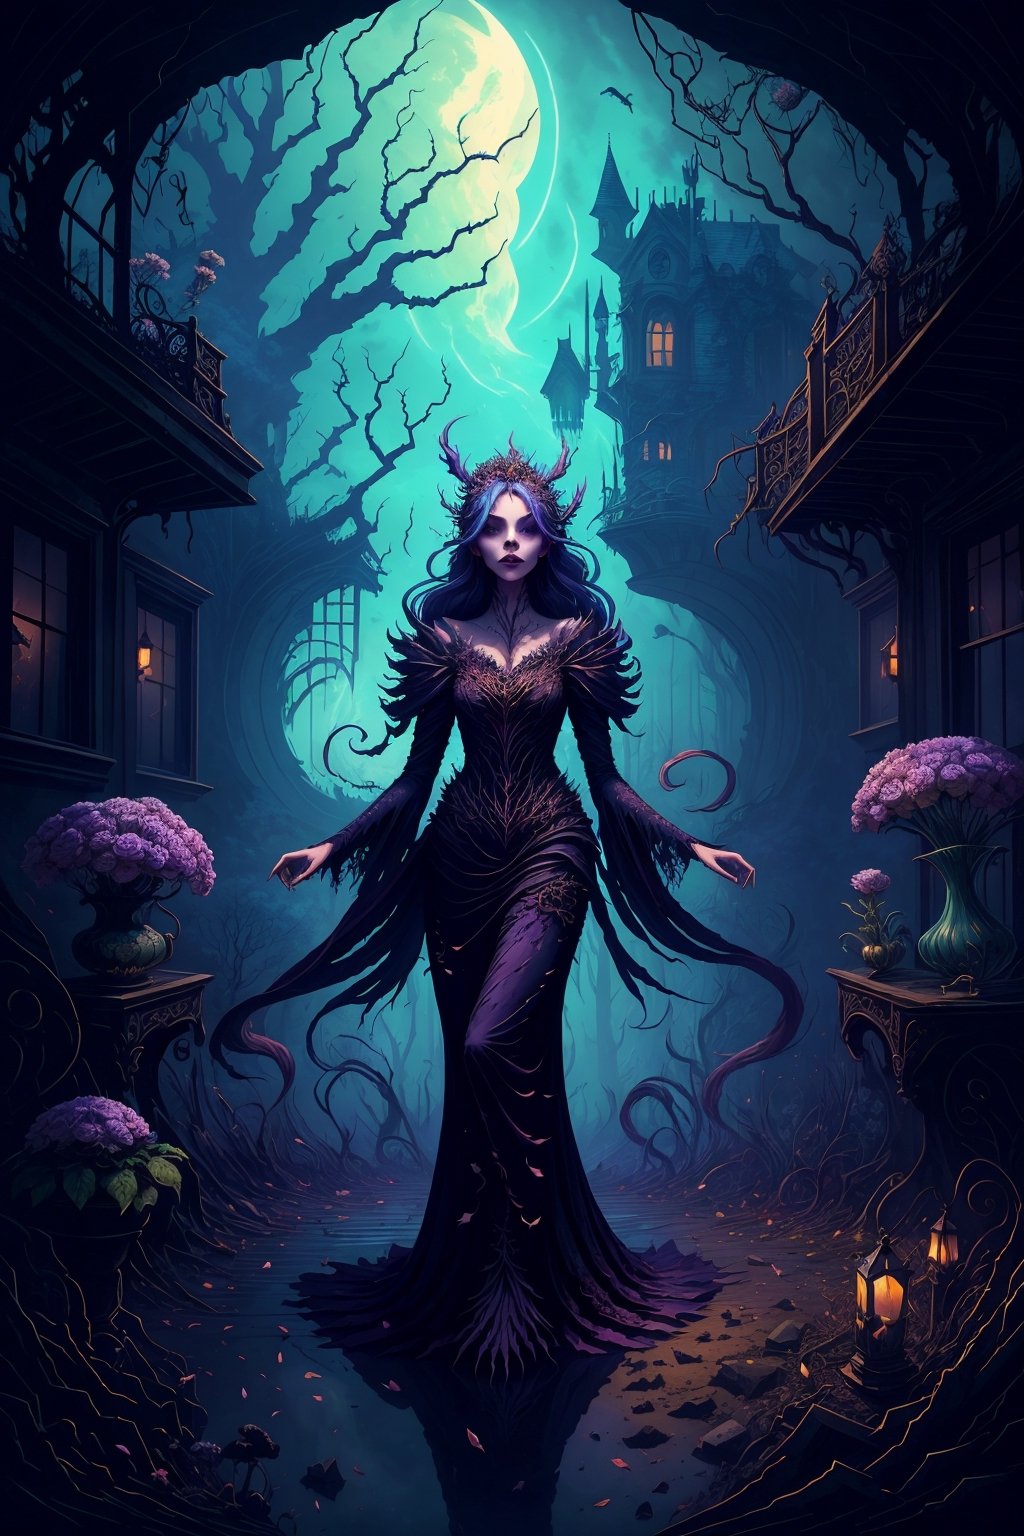 A stunning lady with flowing, vibrant locks of flora swaying gracefully in the ethereal atmosphere. She exudes an enchanting charm amidst a haunting backdrop of dilapidated mansions shrouded by shadows and darkness. In this surreal dreamscape, she captivates your attention completely, creature00d,tshee